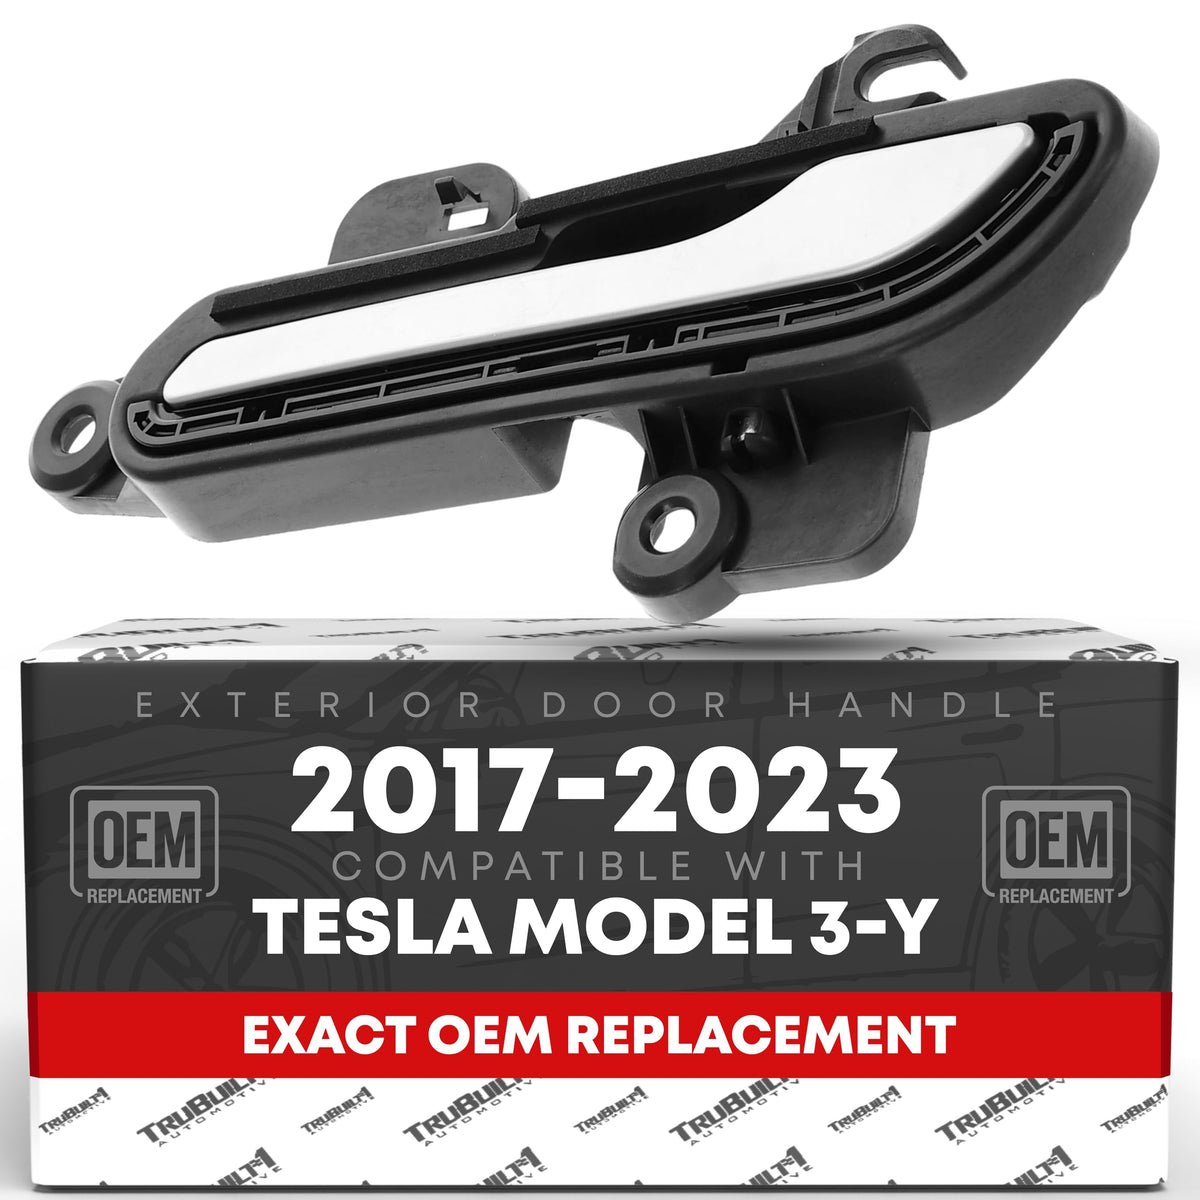 Exterior Front and Rear Passenger's side Door Handle Compatible with 2017-2022 Tesla Model 3, 2020 - 2023 Model Y - Silver Finish, OEM Replacement Part# 11081832-00-J, 1528115-00-B, 15758